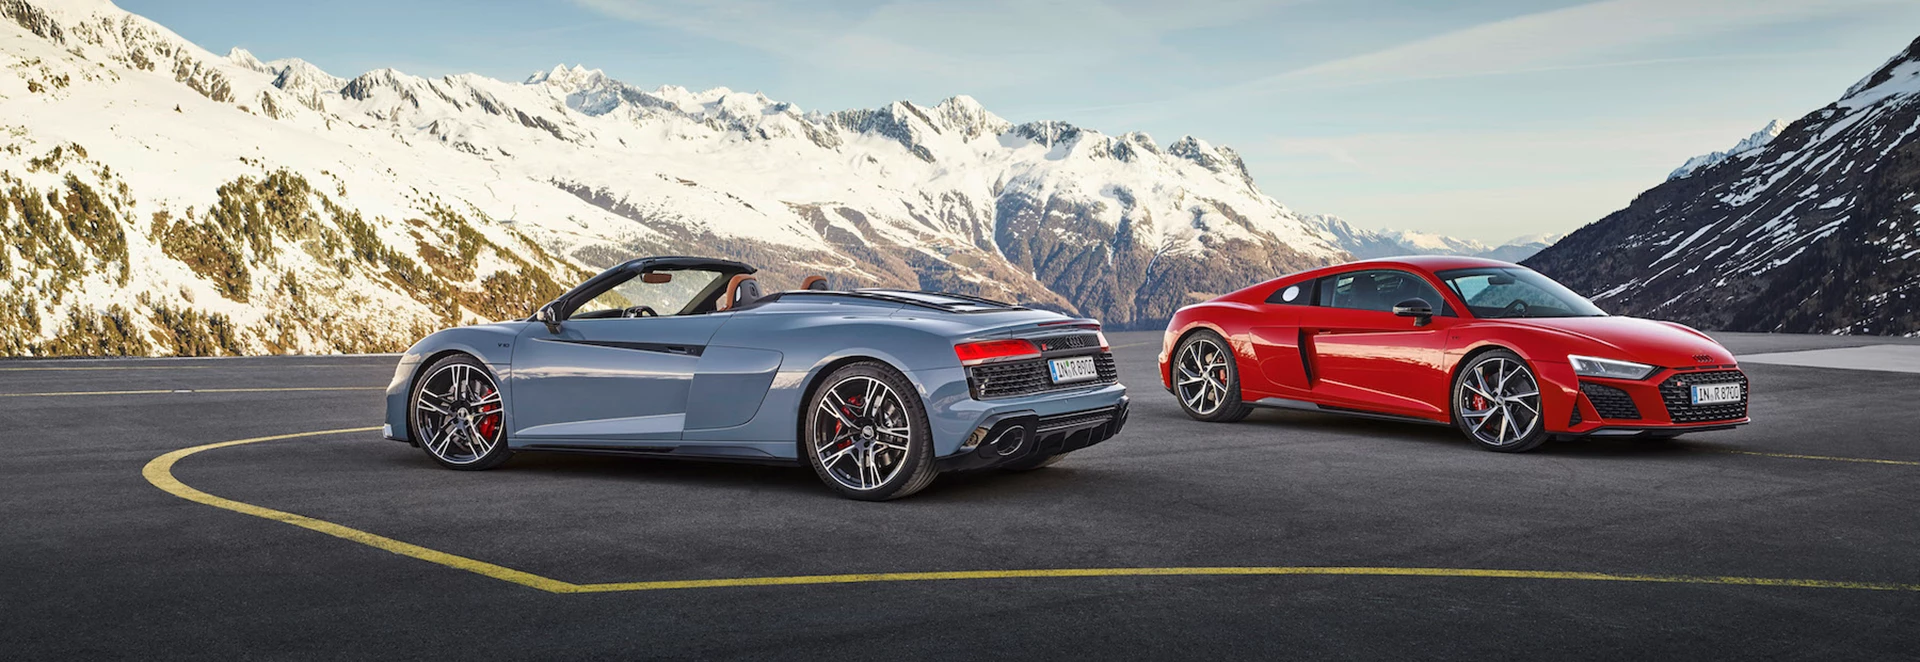 Audi unleashes more powerful R8 Performance RWD 